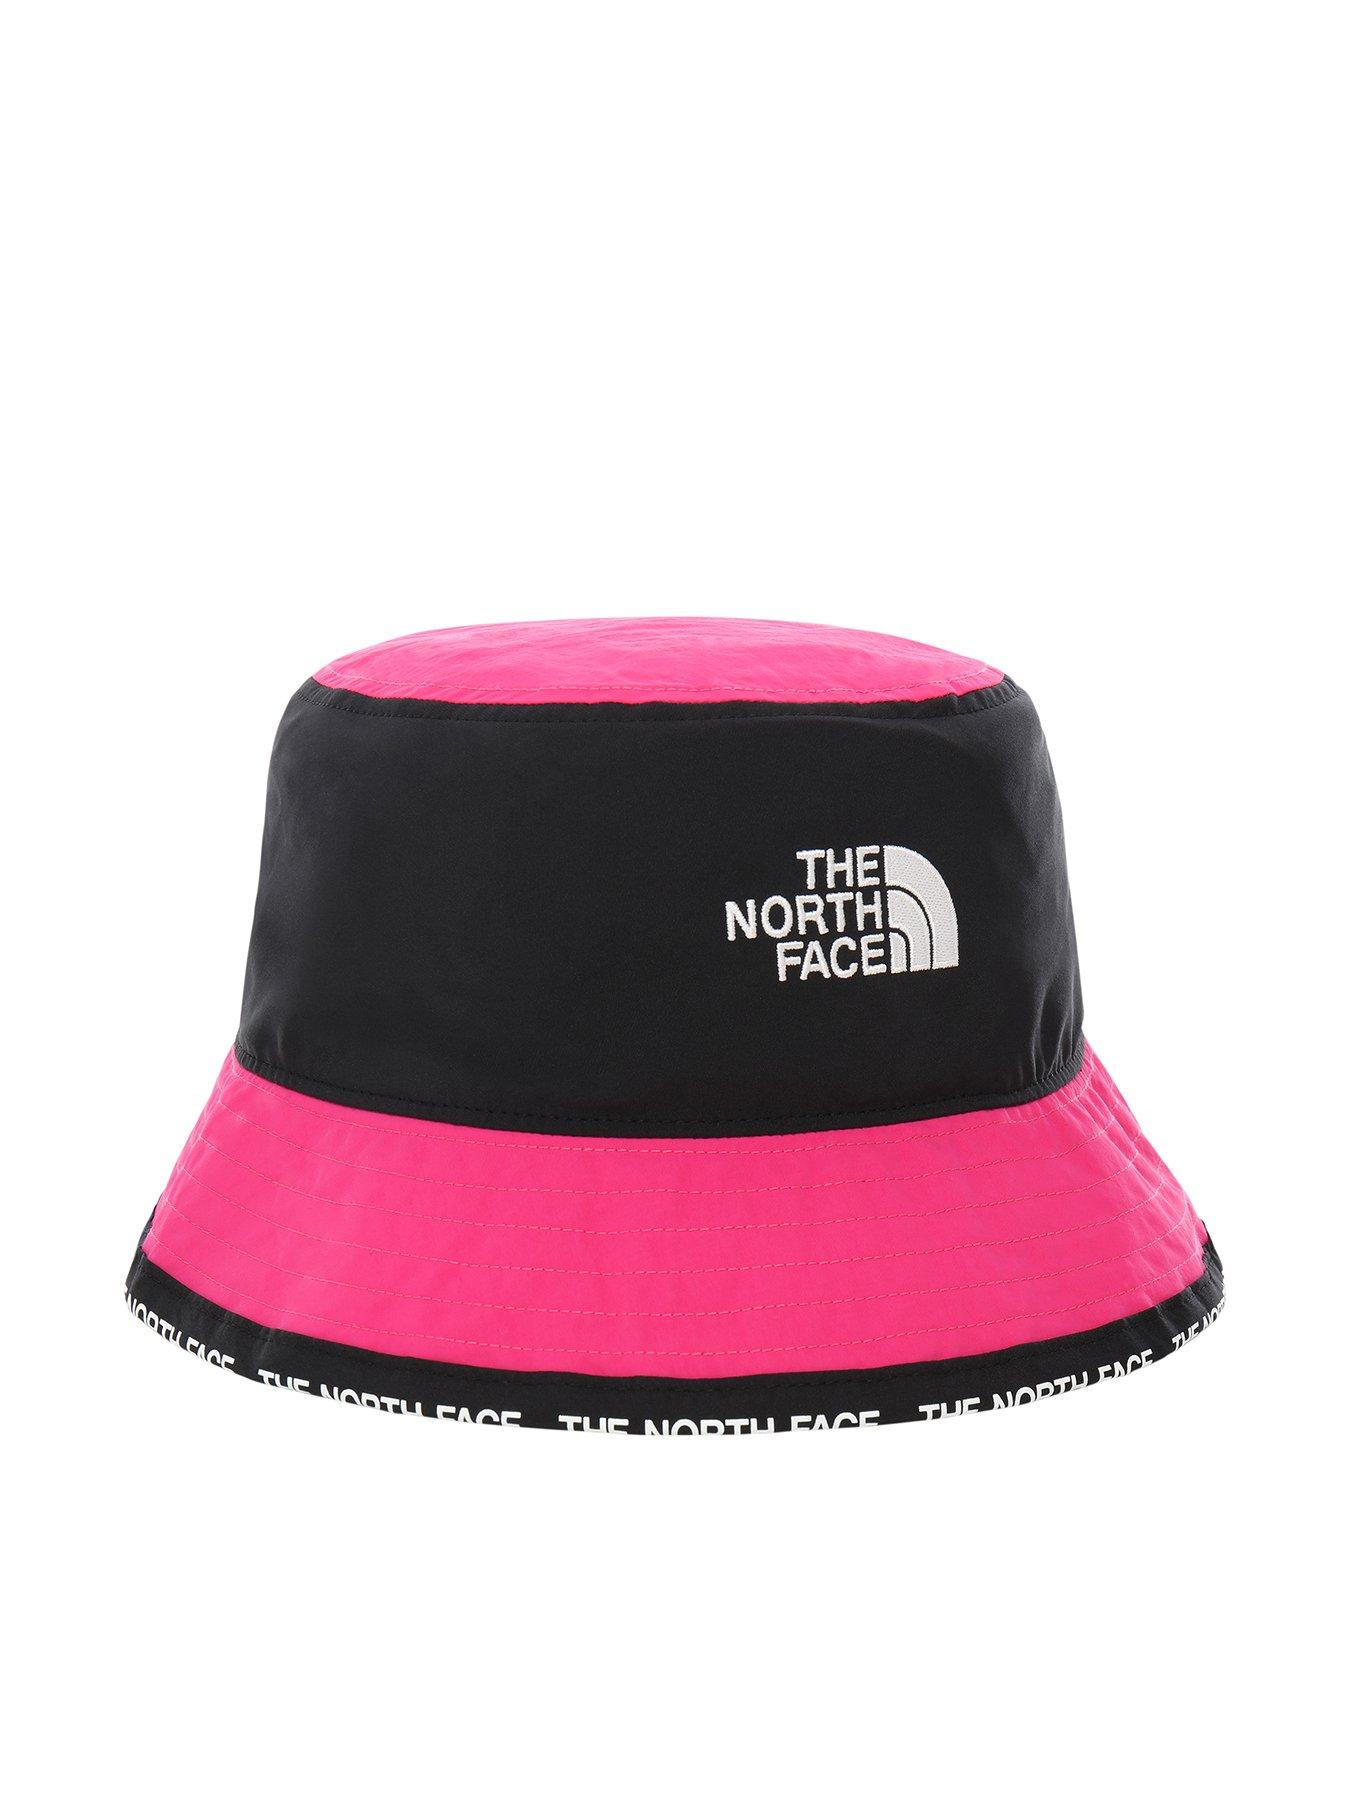 north face hat pink